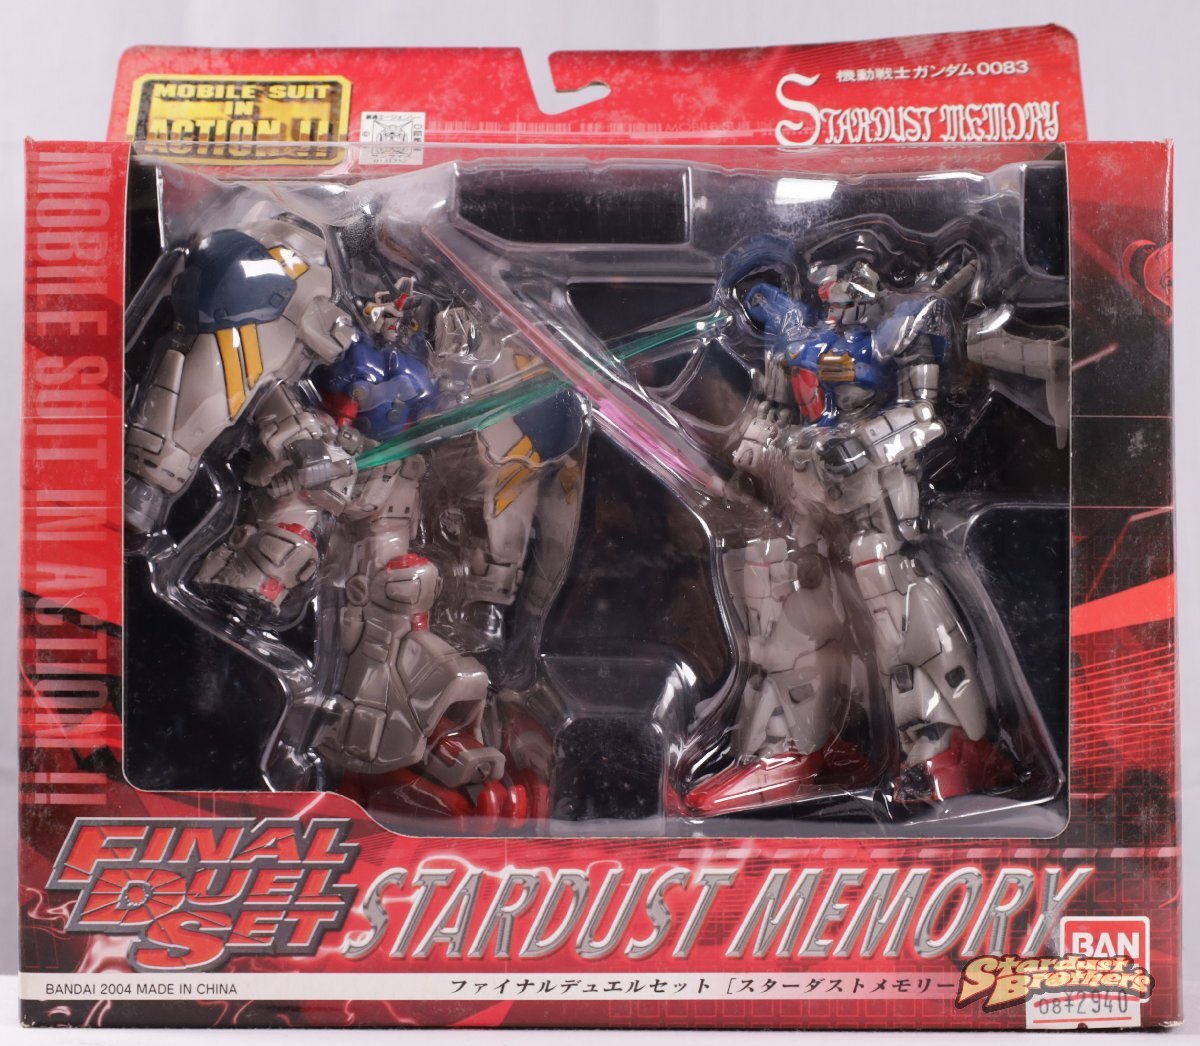 MOBILE SUIT IN ACTION 機動戦士ガンダム0083 STARDUST MEMORYの画像1